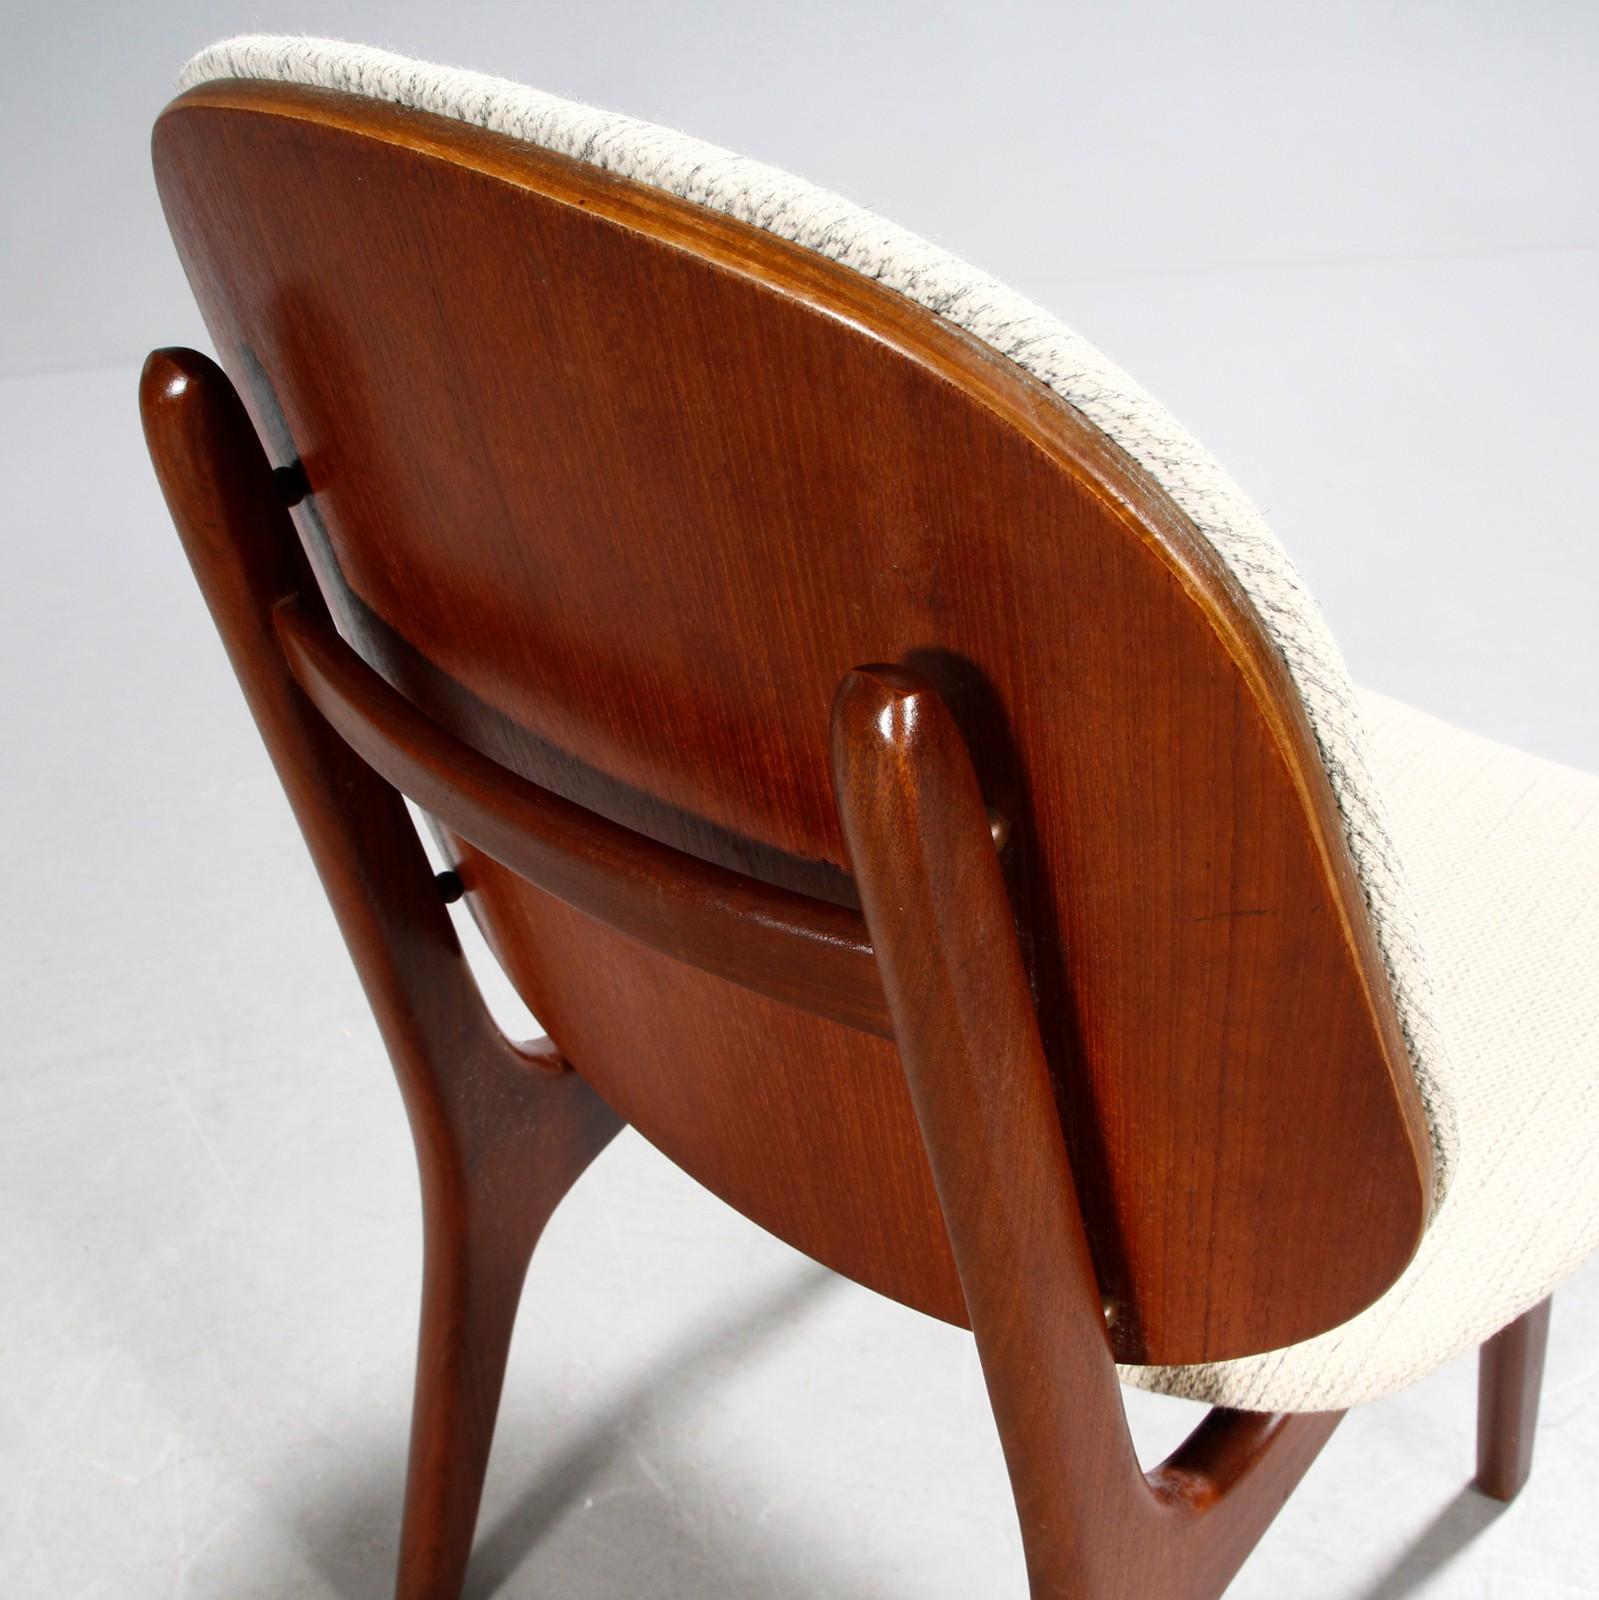 Six Original Dining Chairs 'Model 75' in Teak by Arne Hovmand Olsen In Good Condition For Sale In Stockholm, SE